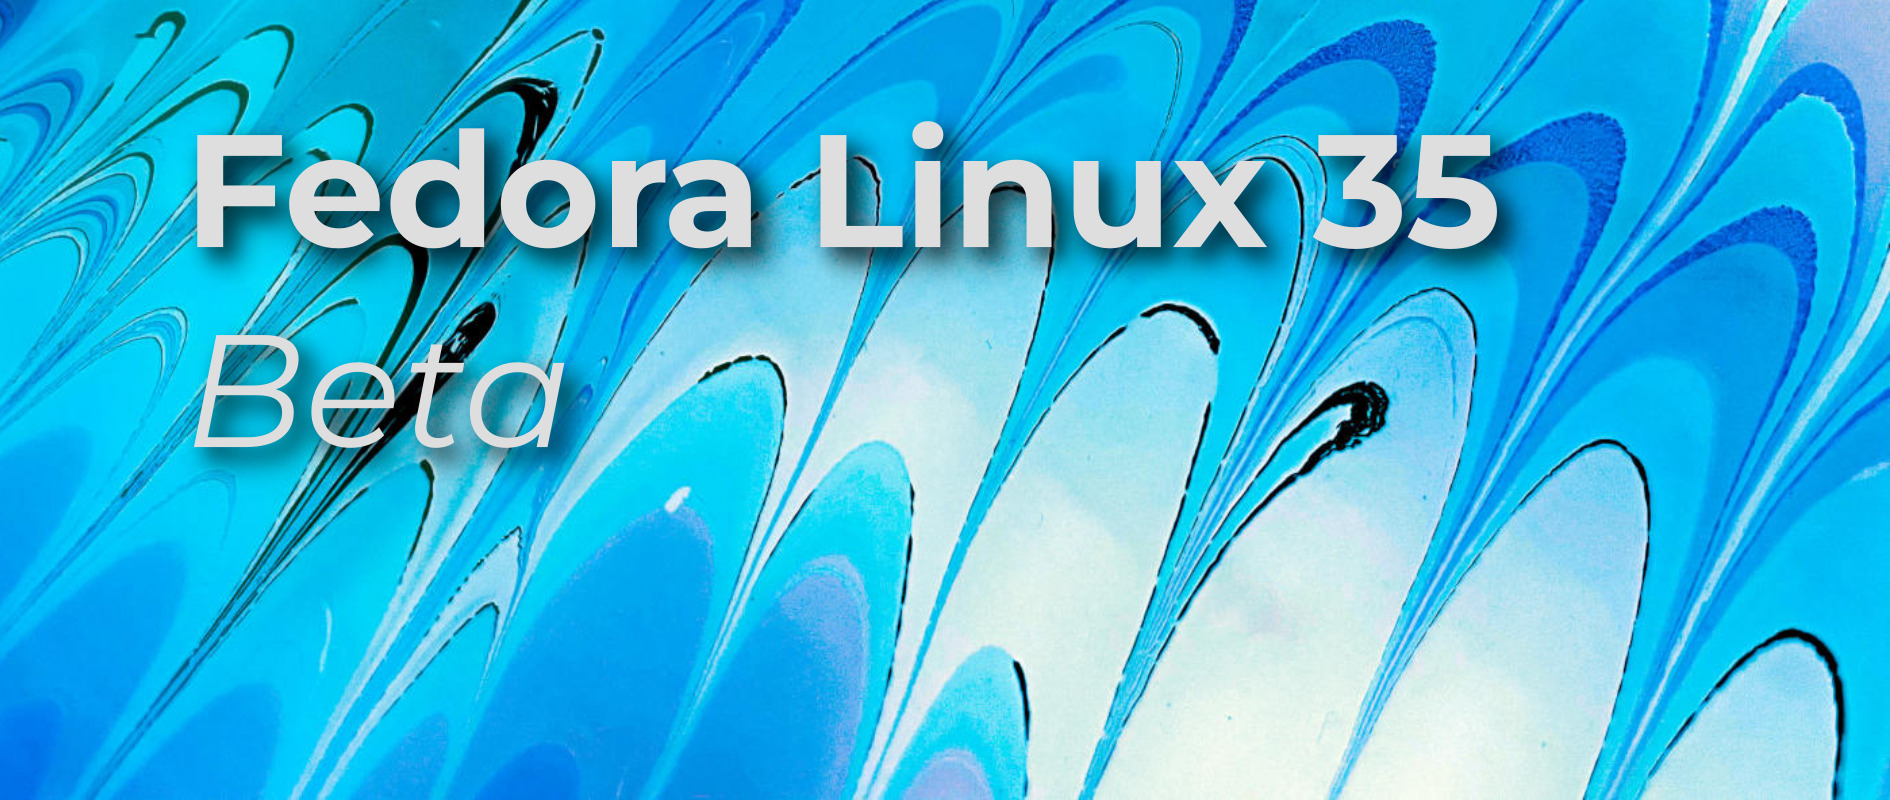 The Fedora Project is pleased to announce the immediate availability of Fedora Linux 35 Beta, the next step towards our planned Fedora Linux 35 releas